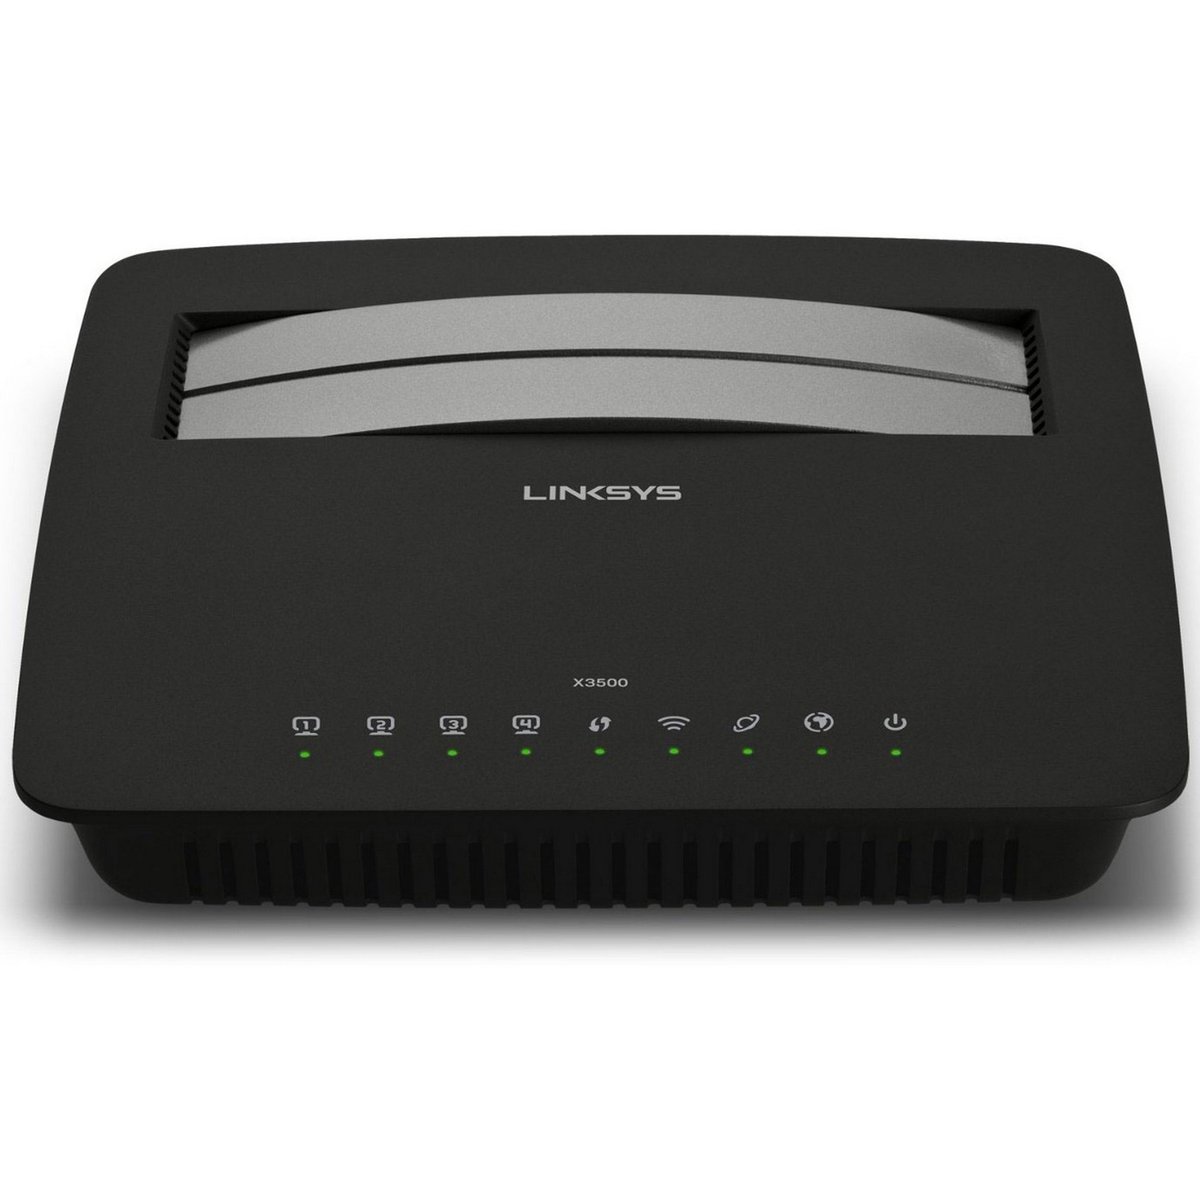 Linskys X3500 N750 Dual-Band Wireless Router with ADSL2+ Modem